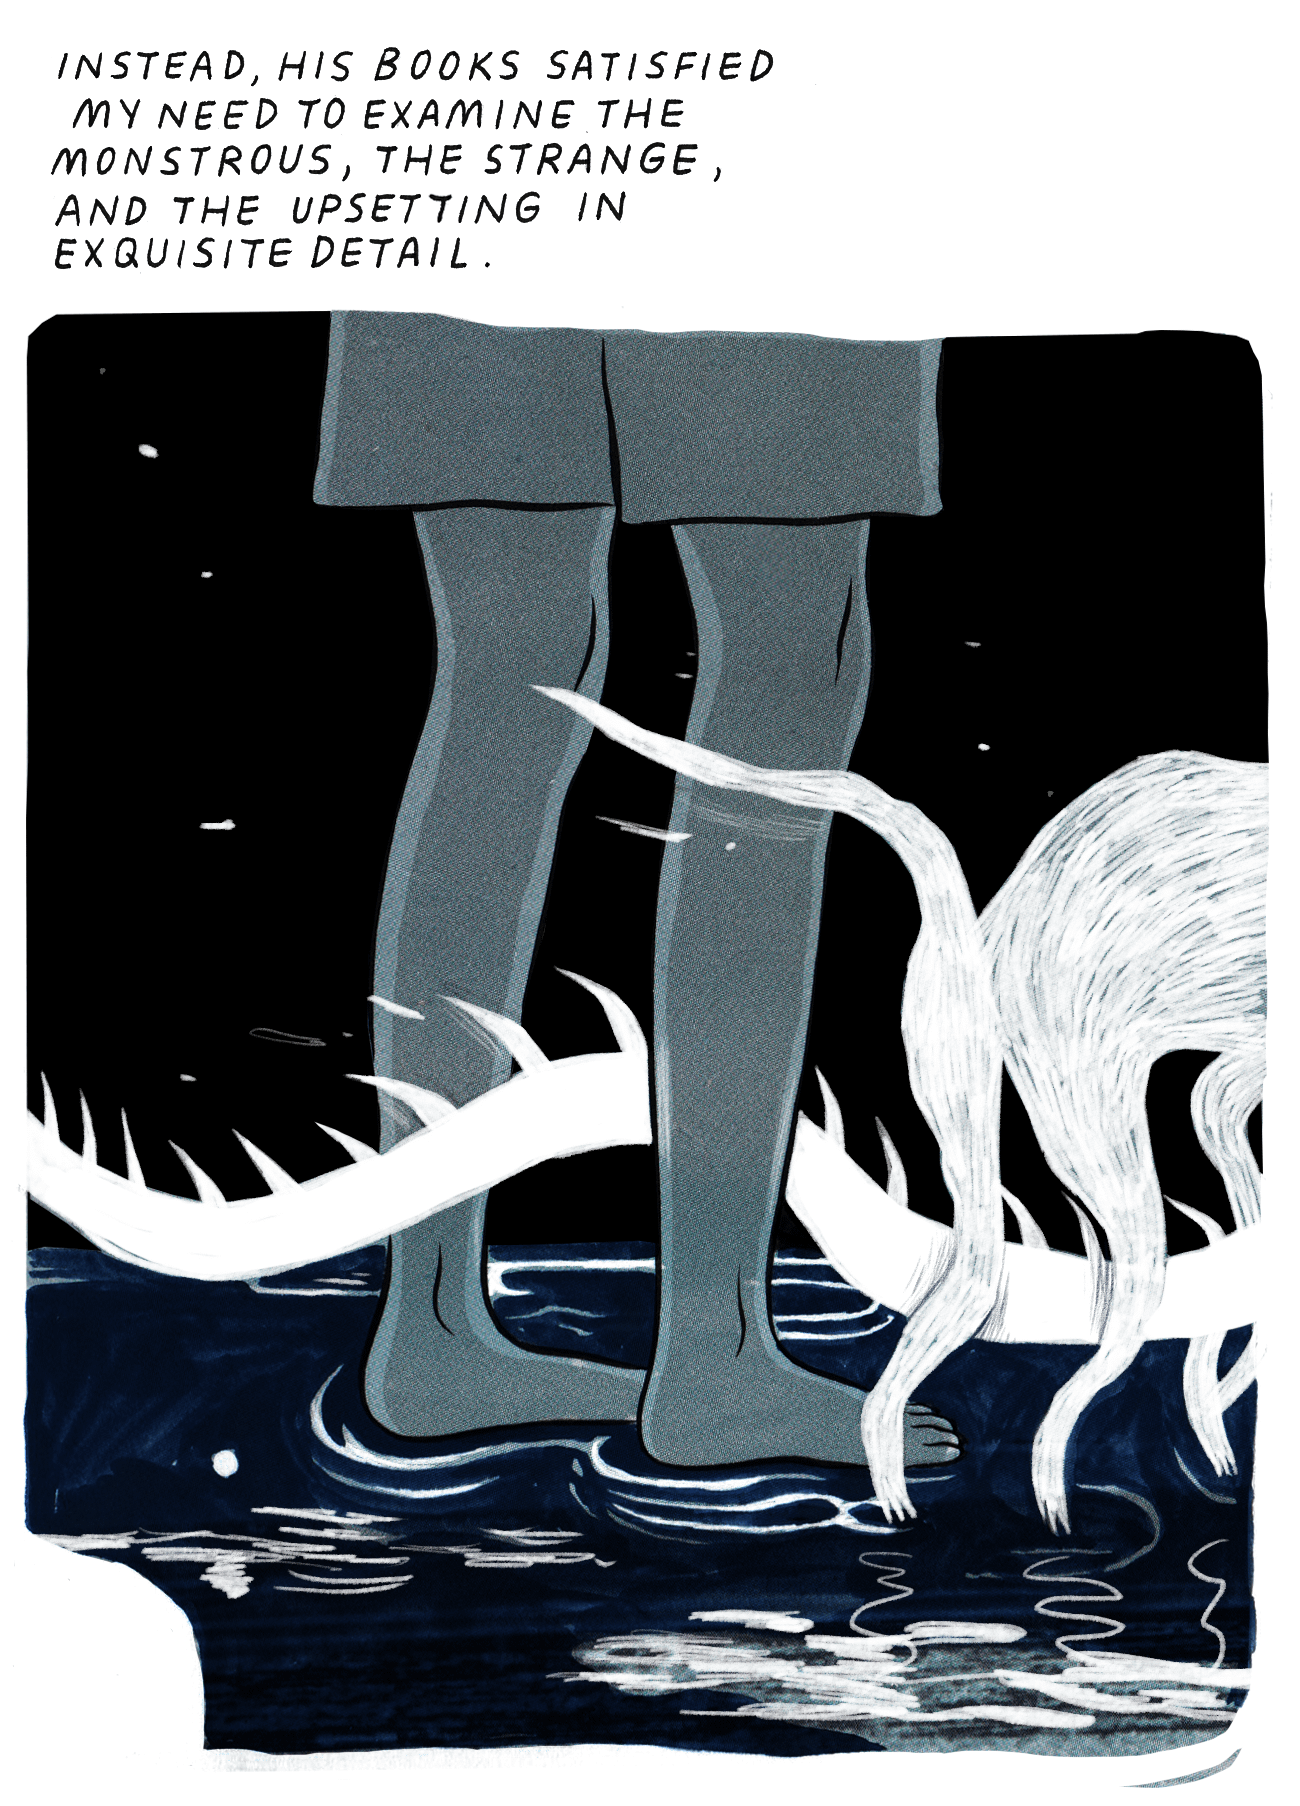 An image of Lee’s legs standing in a shallow pool of water, still barefoot. She is inside the dark tunnel, where the background is black, and the water is dark blue. A dragon tail snakes between her ankles and a small four-legged animal, maybe a cat or dog, steps over the dragon tail a few paces ahead of her. The text reads, “Instead, his books satisfied my need to examine the monstrous, the strange, and the upsetting in exquisite detail.”